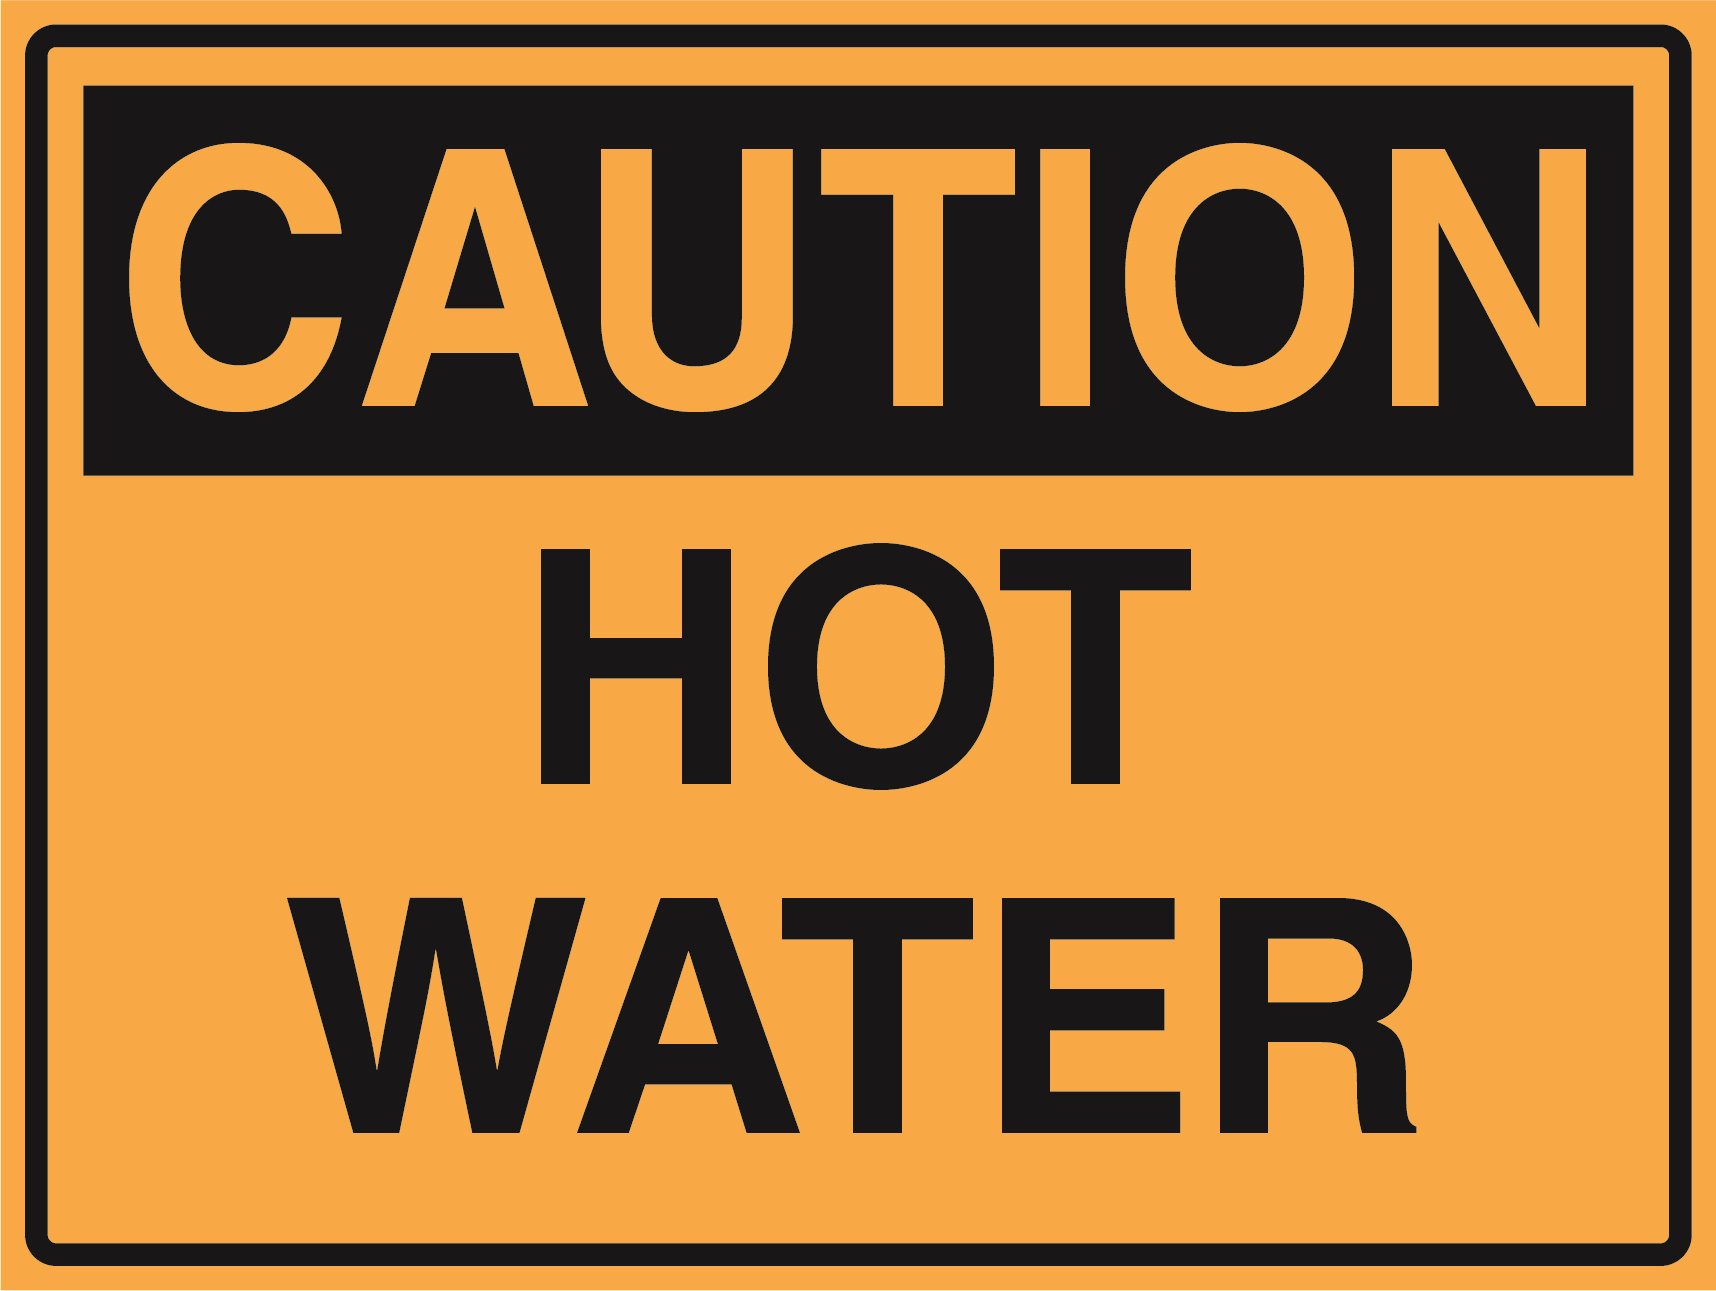 Caution - Hot Water - 450x600